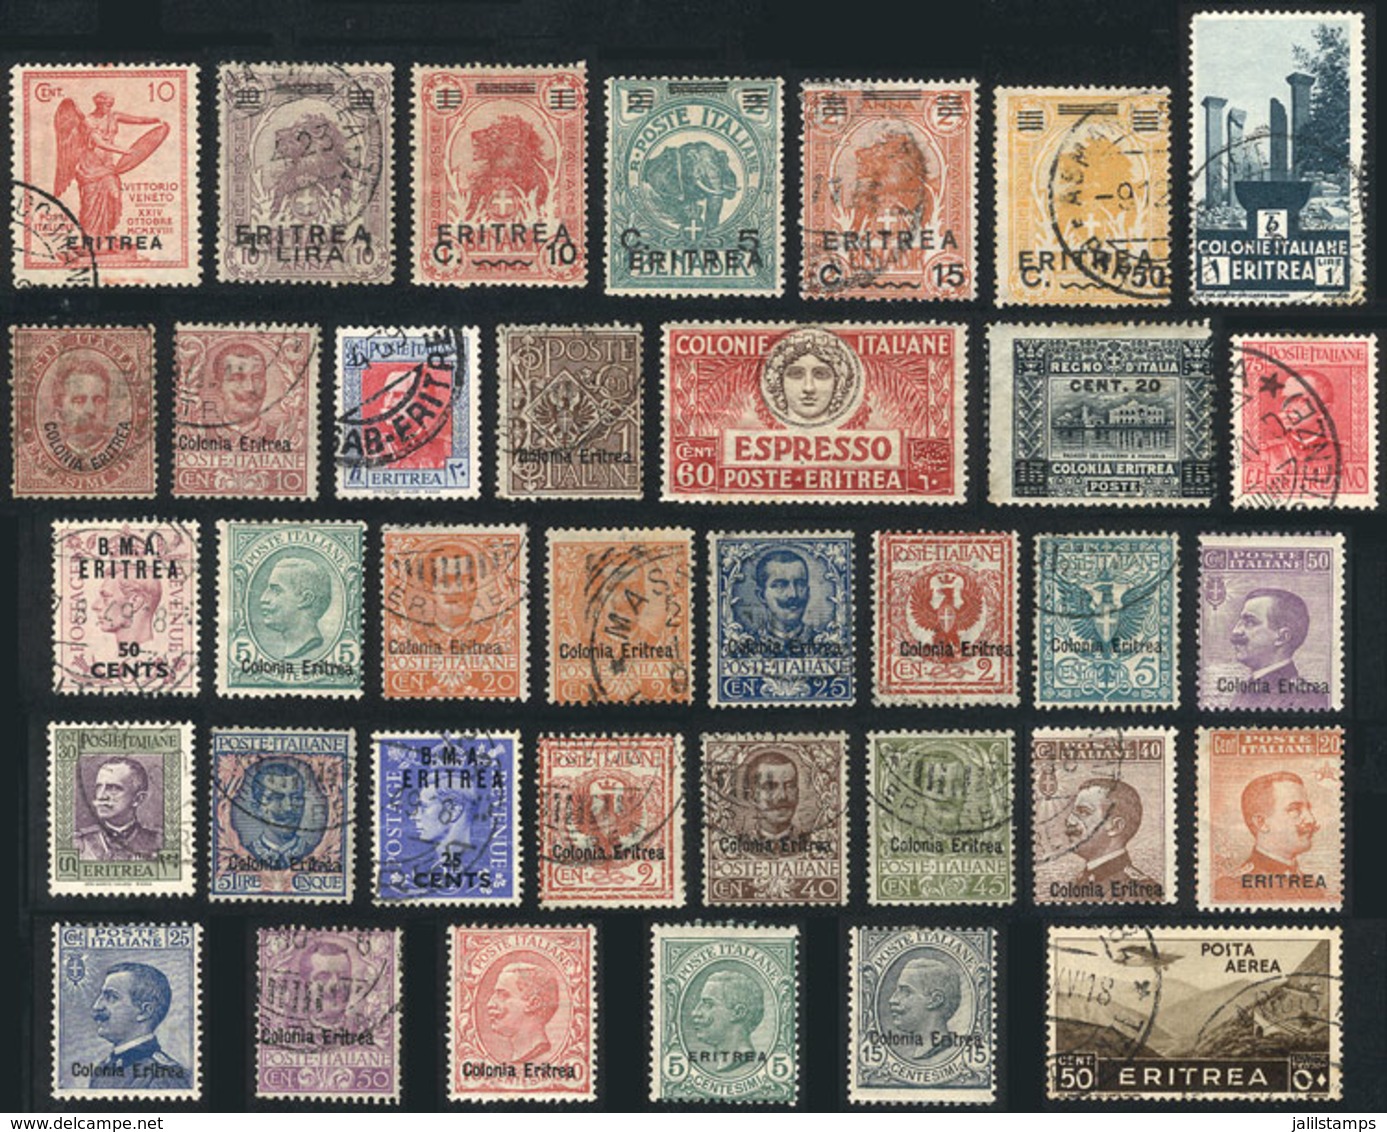 545 ERITREA: Interesting Lot Of Used Or Mint Stamps, Very Fine General Quality. I Estimate A Scott Catalog Value Of Over - Eritrea